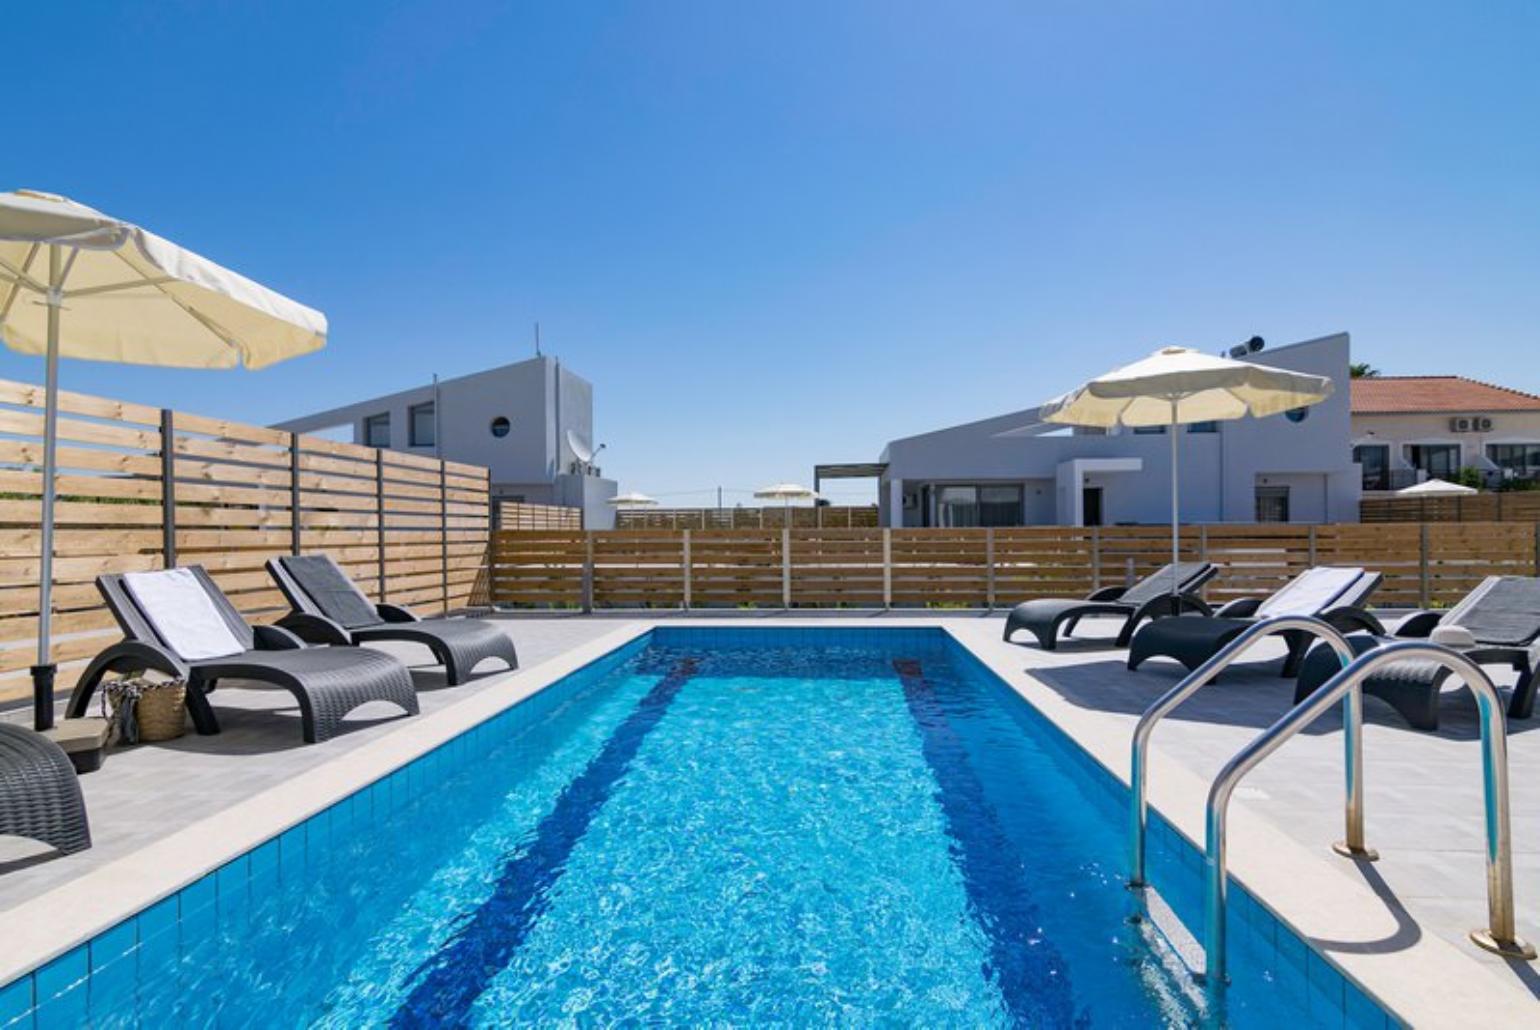 Private pool and terrace area